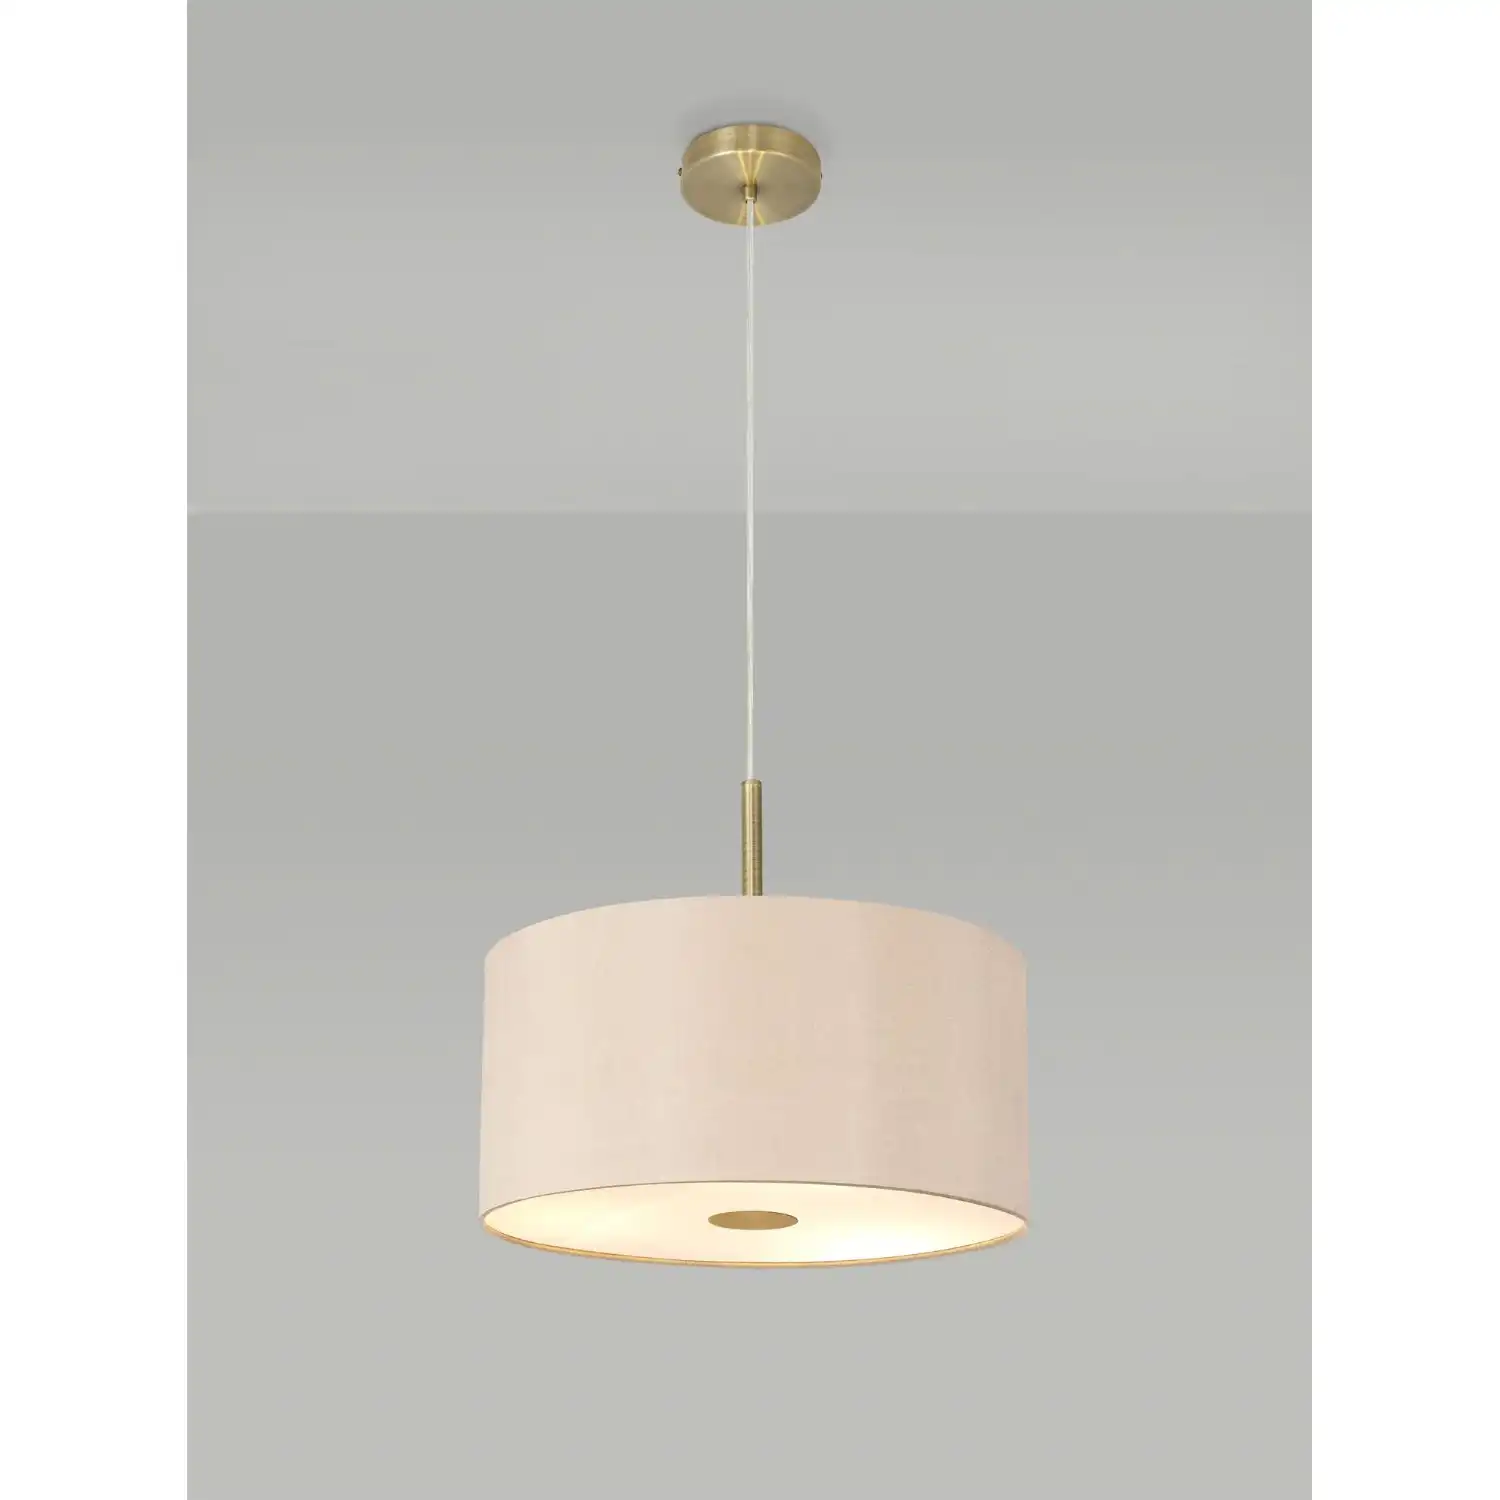 Baymont Antique Brass 3m 5 Light E27 Single Pendant c w 400mm Dual Faux Silk Shade, Antique Gold Ruby And 400mm Frosted AB Acrylic Diffuser